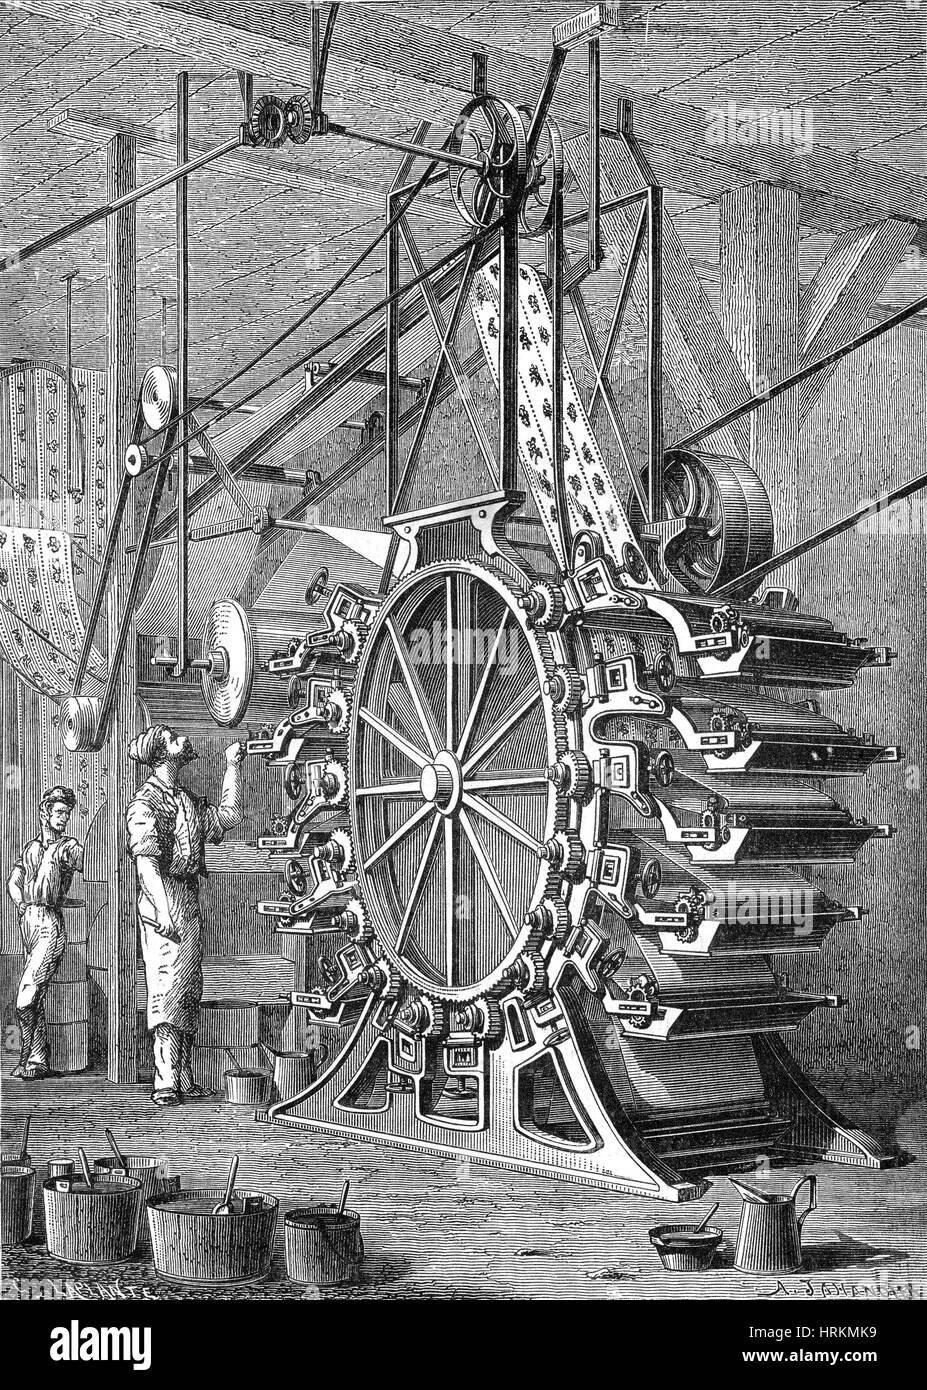 Two-Color Rotary Printing Press, 19th Century Stock Photo